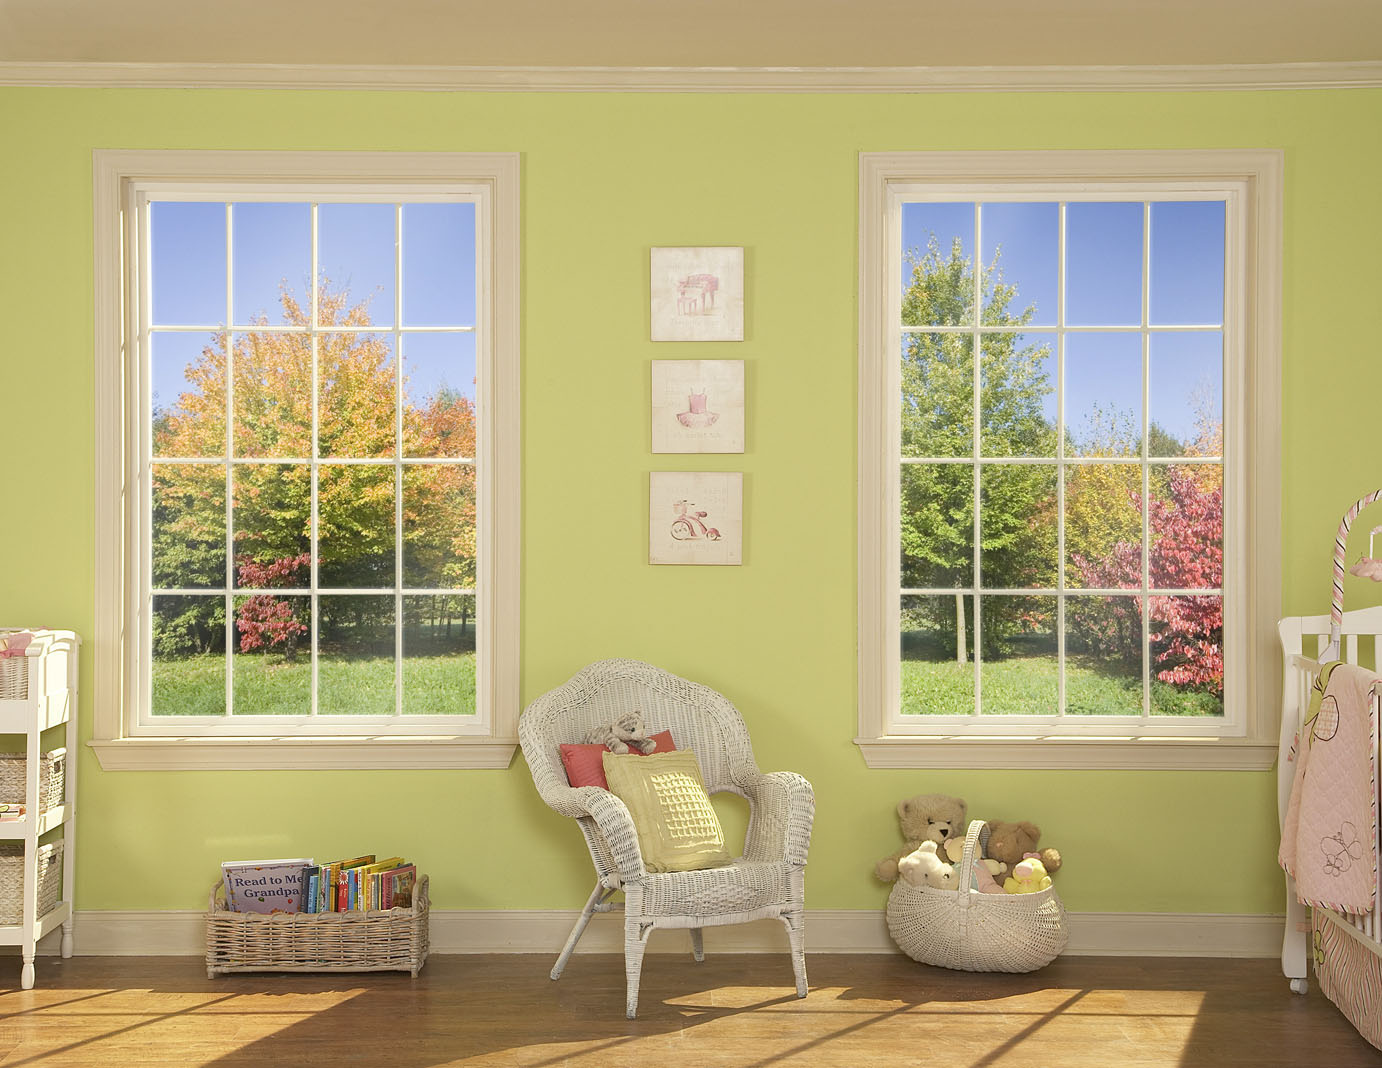 With our lifetime warranty, the last windows you'll need to buy.